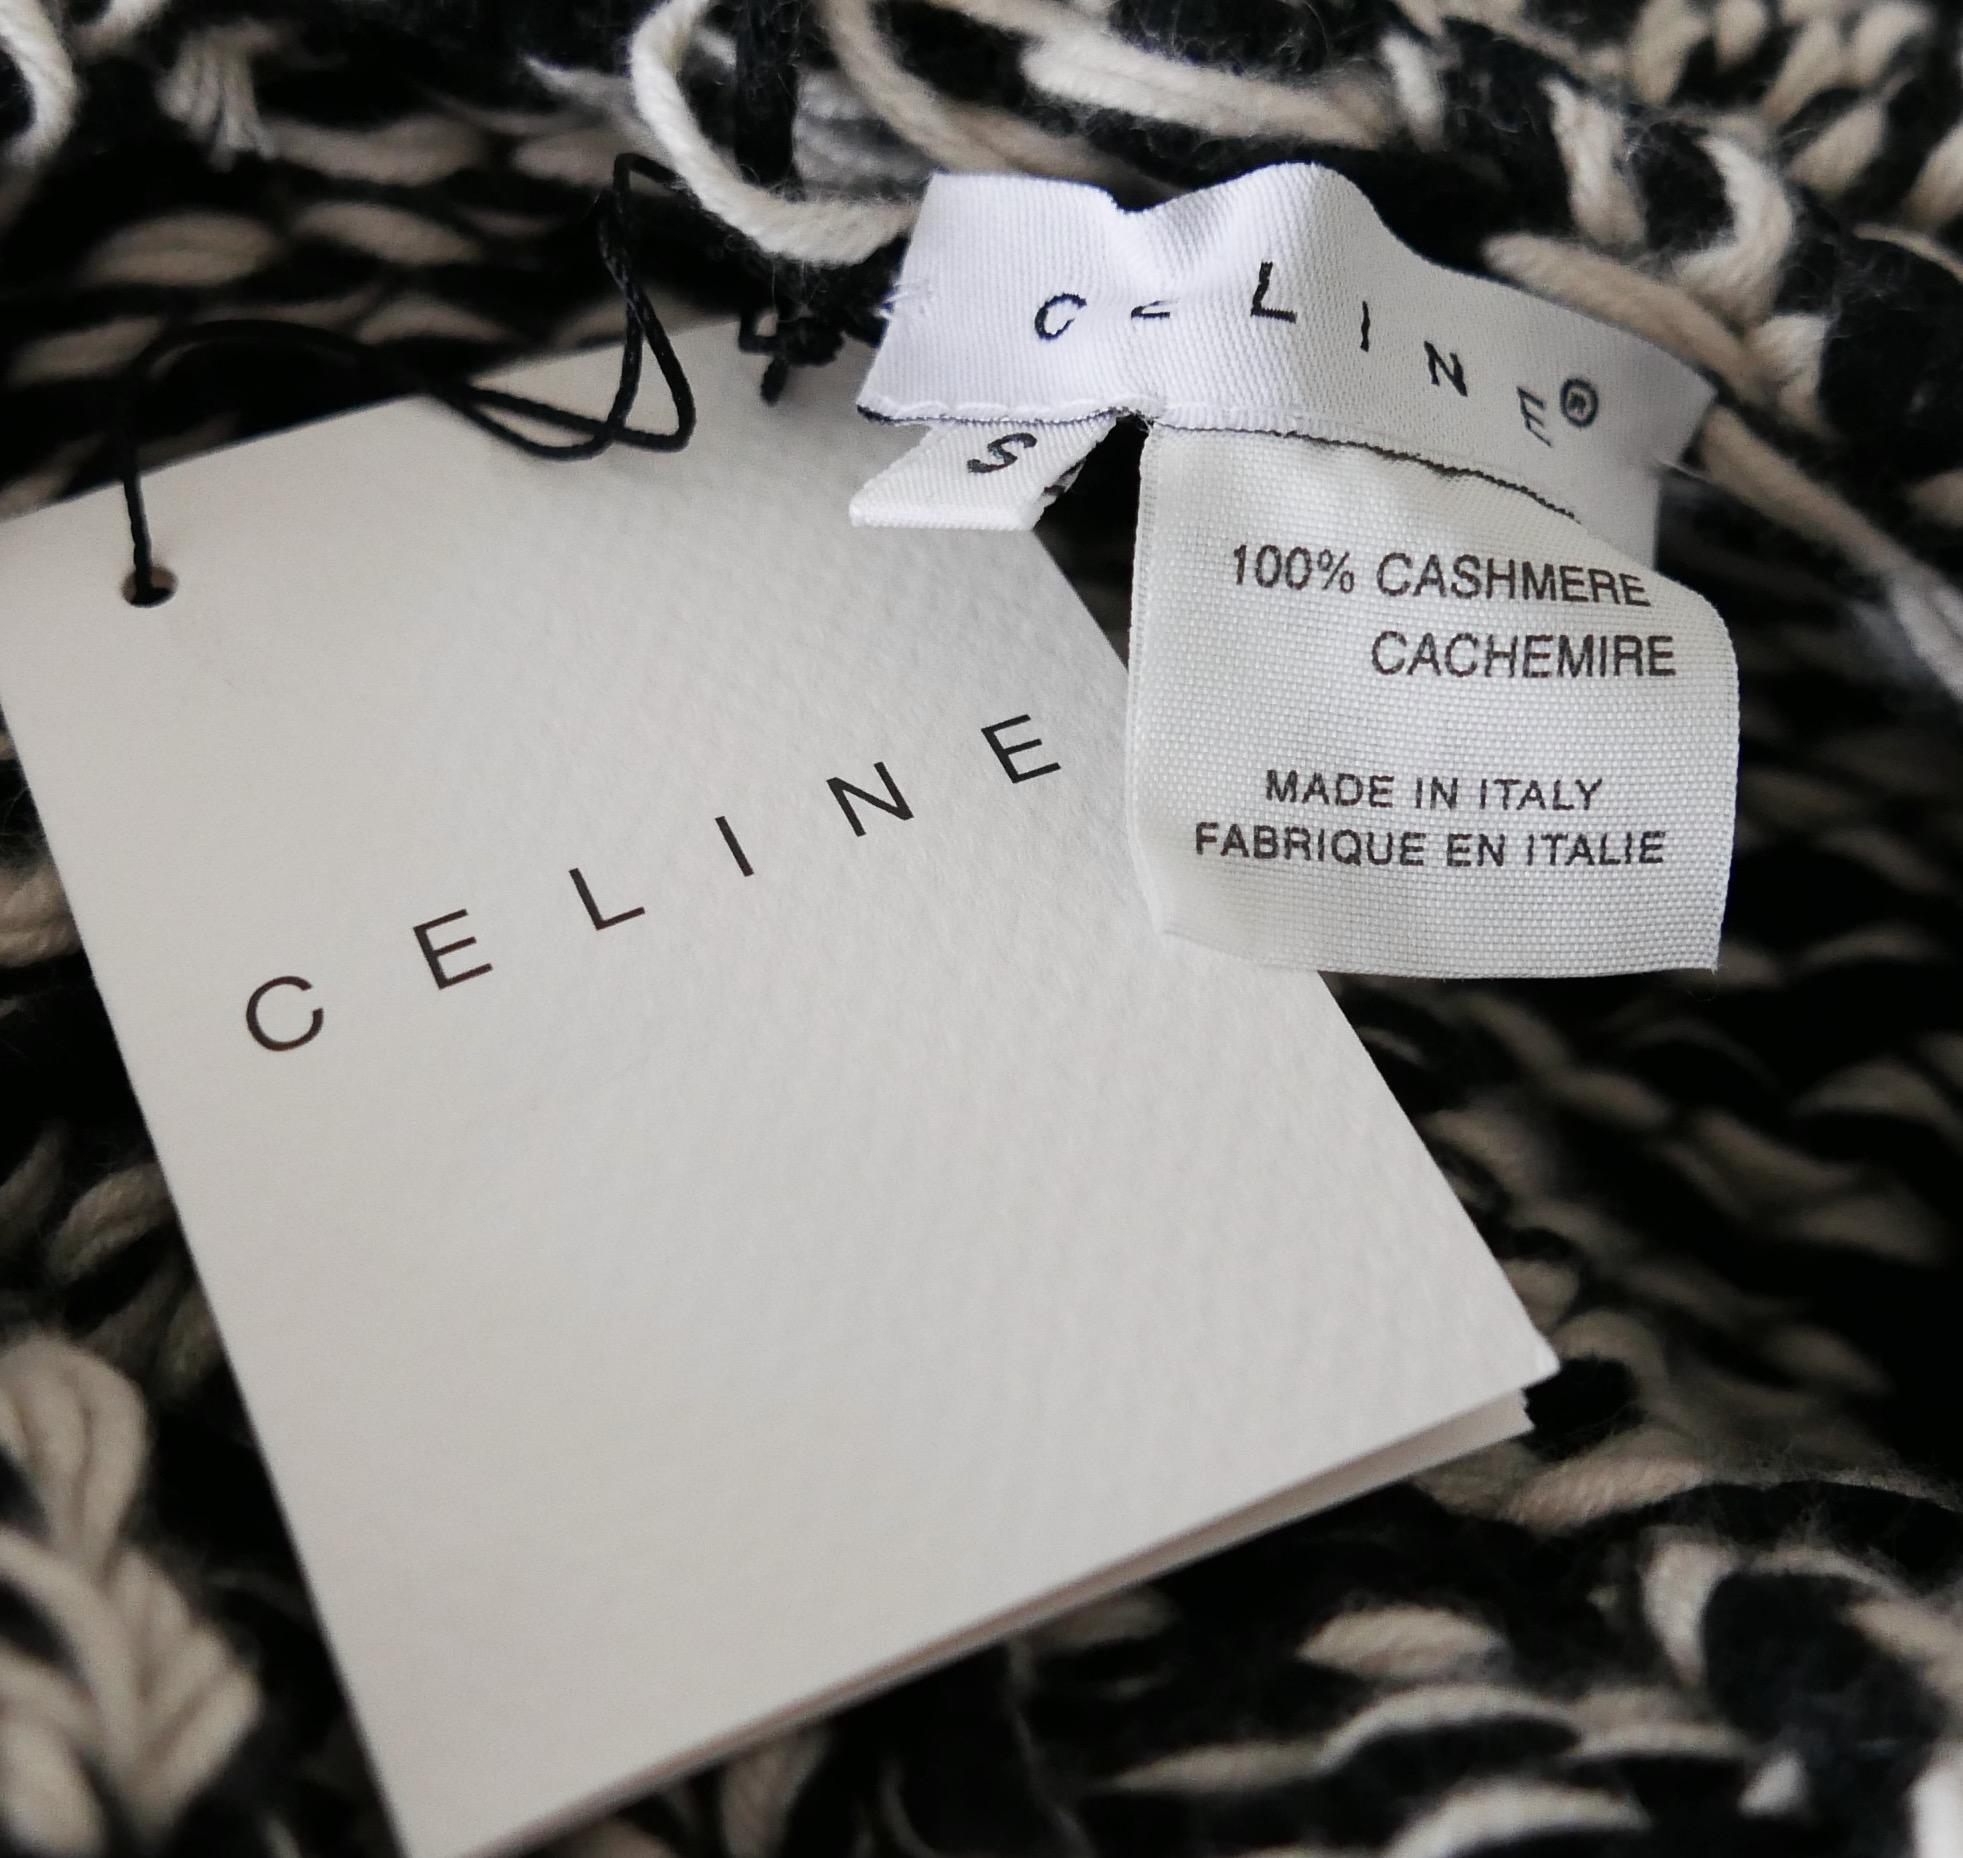 Celine x Michael Kors Hooded Cashmere Sweater For Sale 2